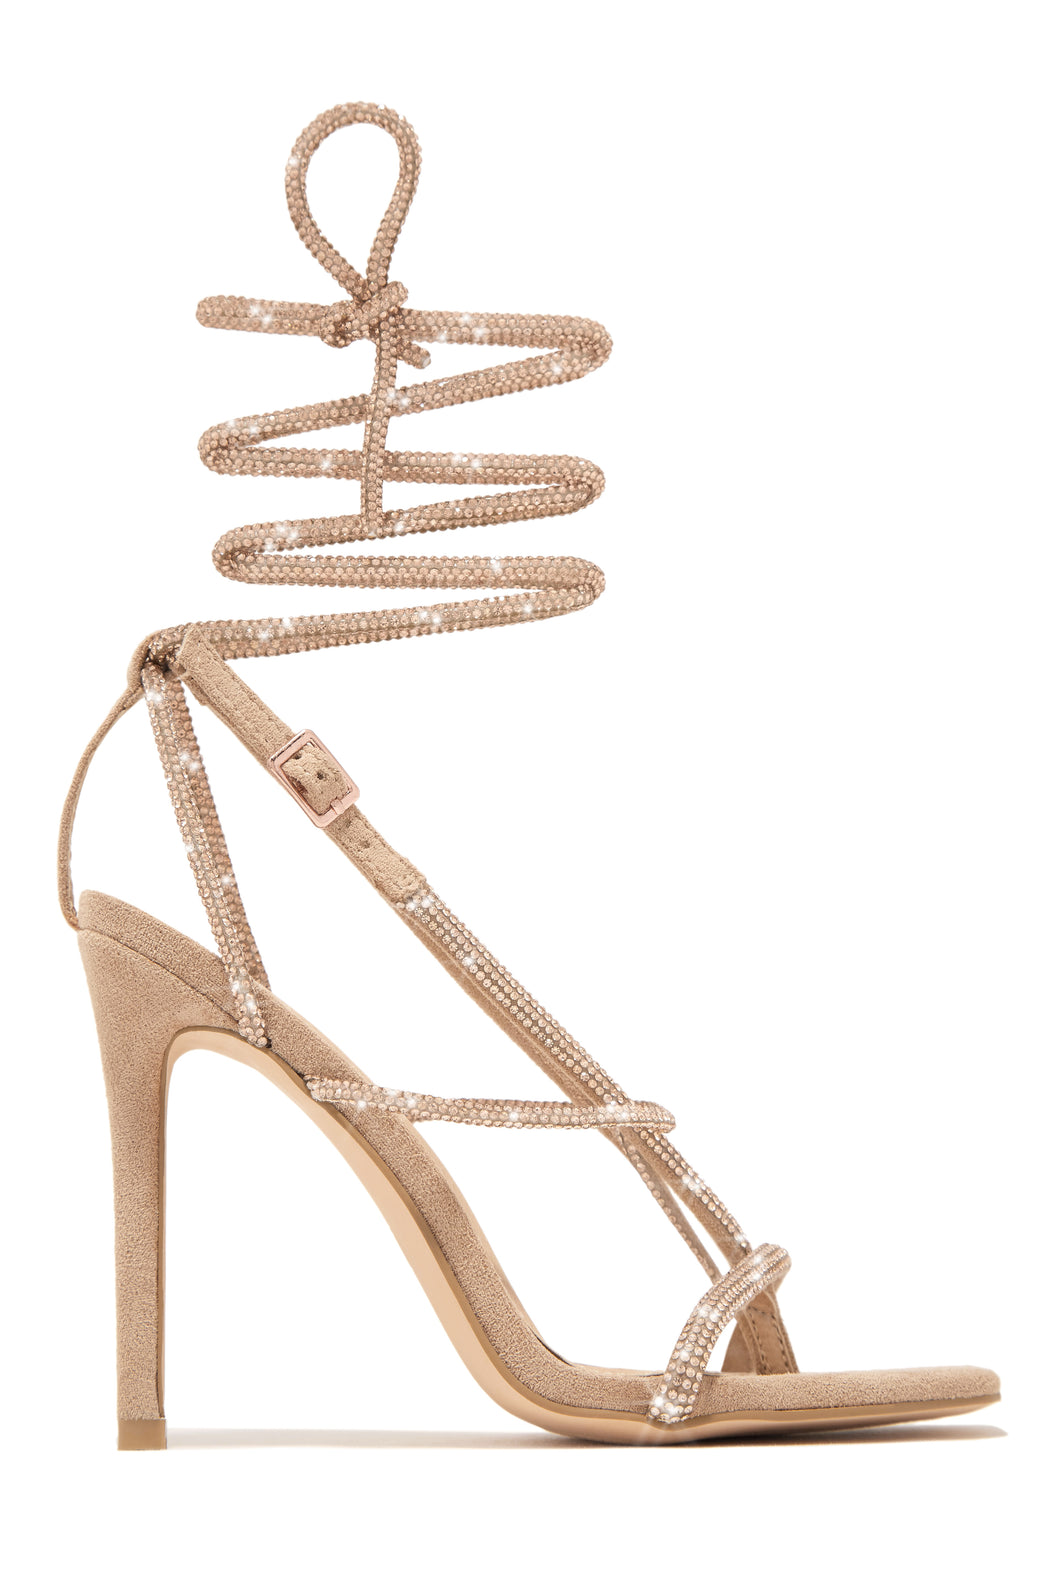 Special Invite Embellished Lace Up High Heels - Nude